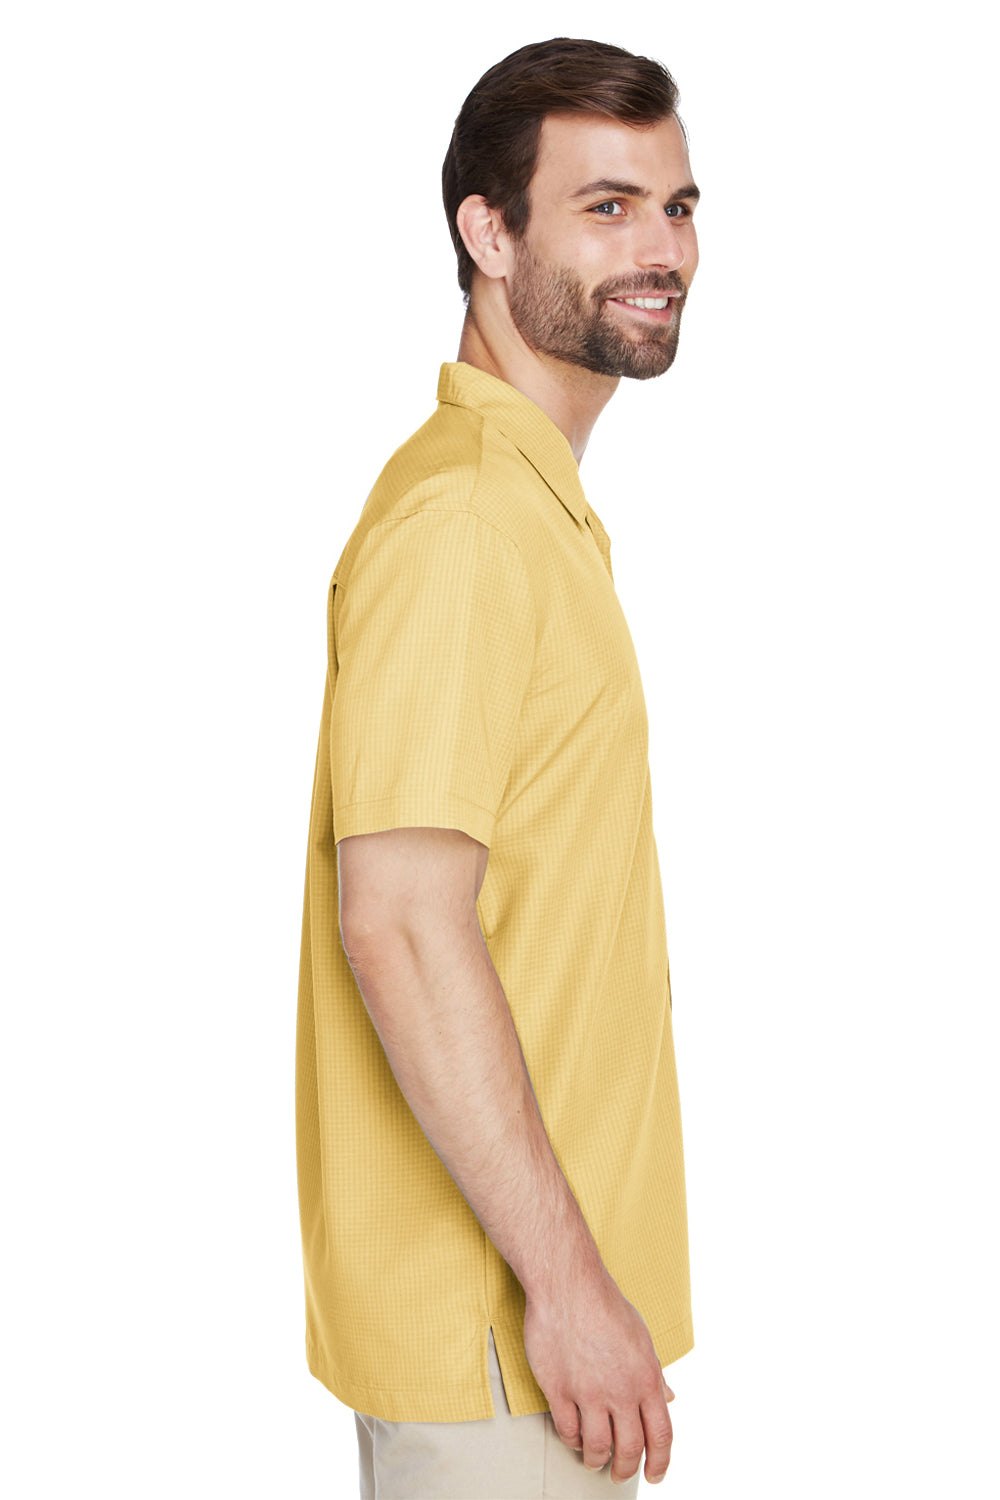 Harriton M560 Mens Barbados Wrinkle Resistant Short Sleeve Button Down Camp Shirt w/ Pocket Pineapple Yellow Side